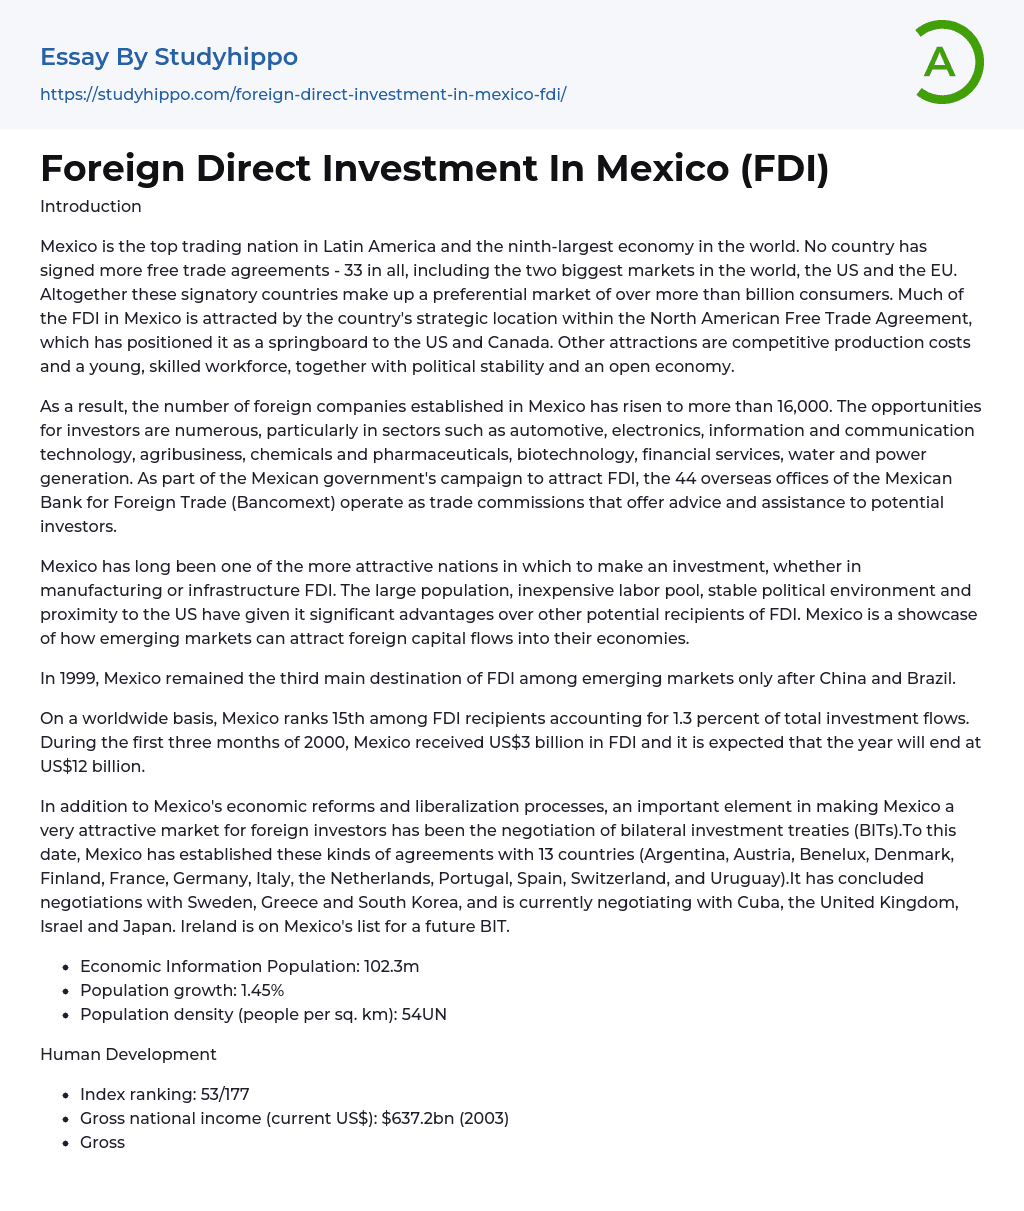 Foreign Direct Investment In Mexico (FDI) Essay Example